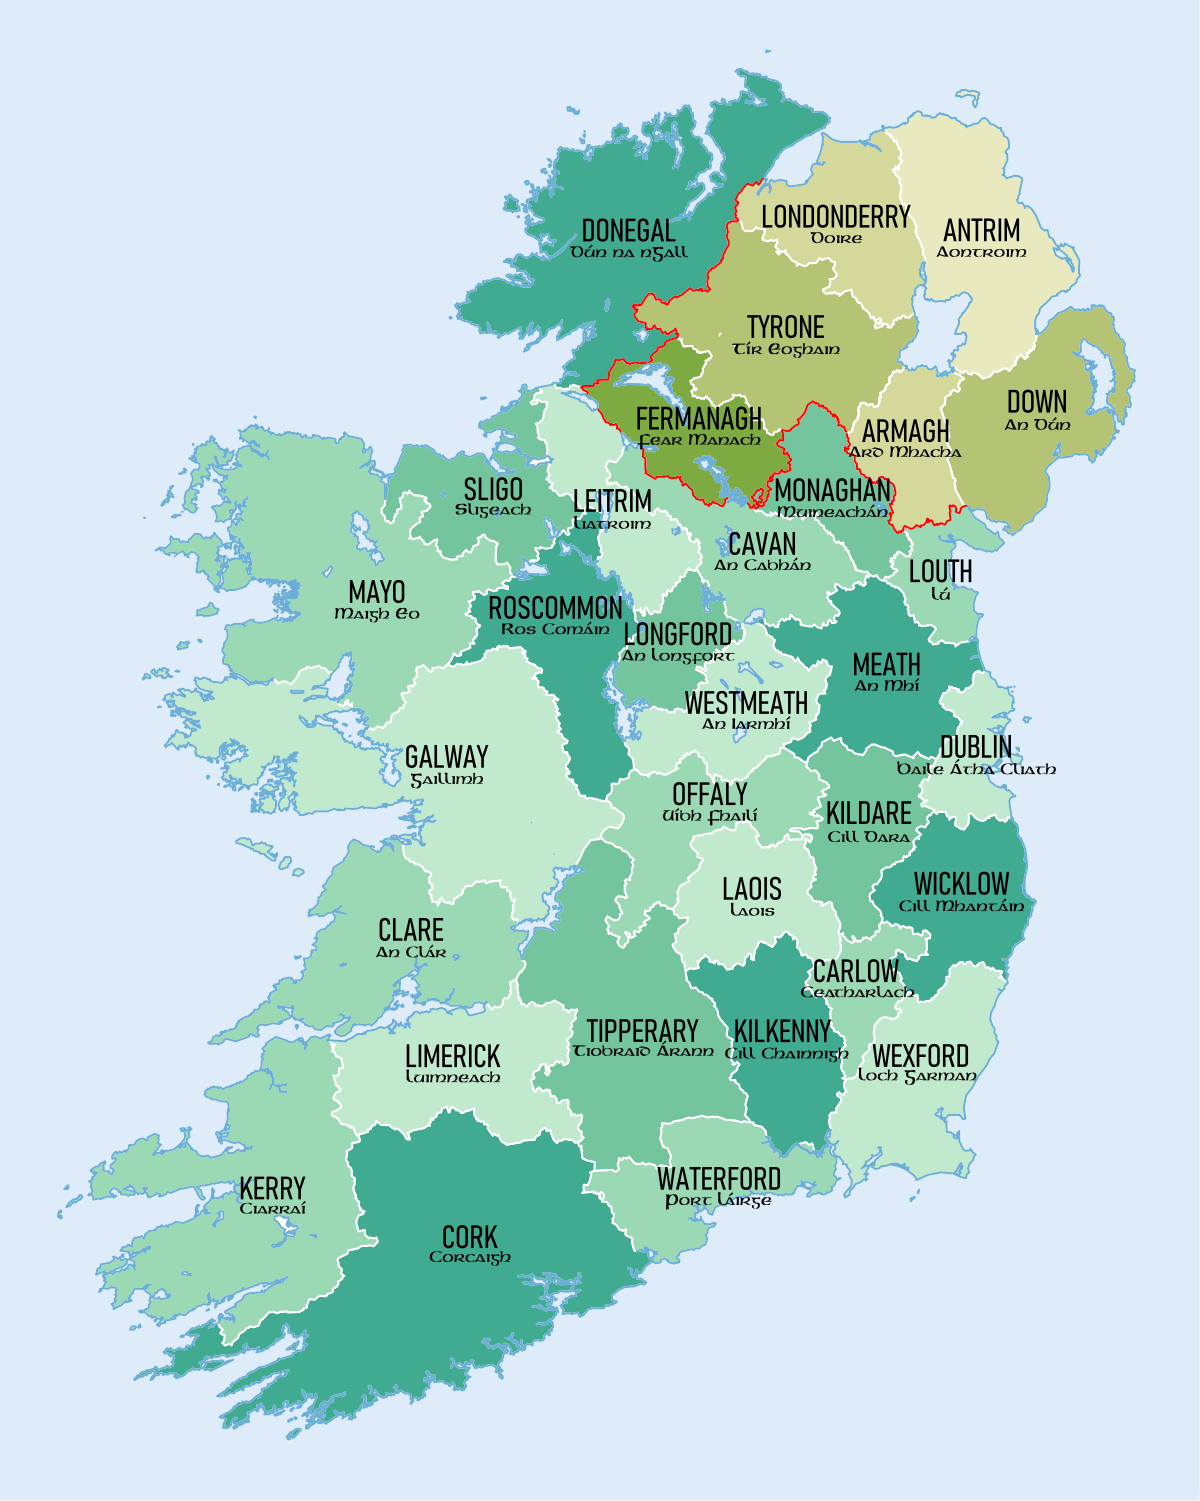 Historic Maps - All Island Ireland - Map Collections at UCD 